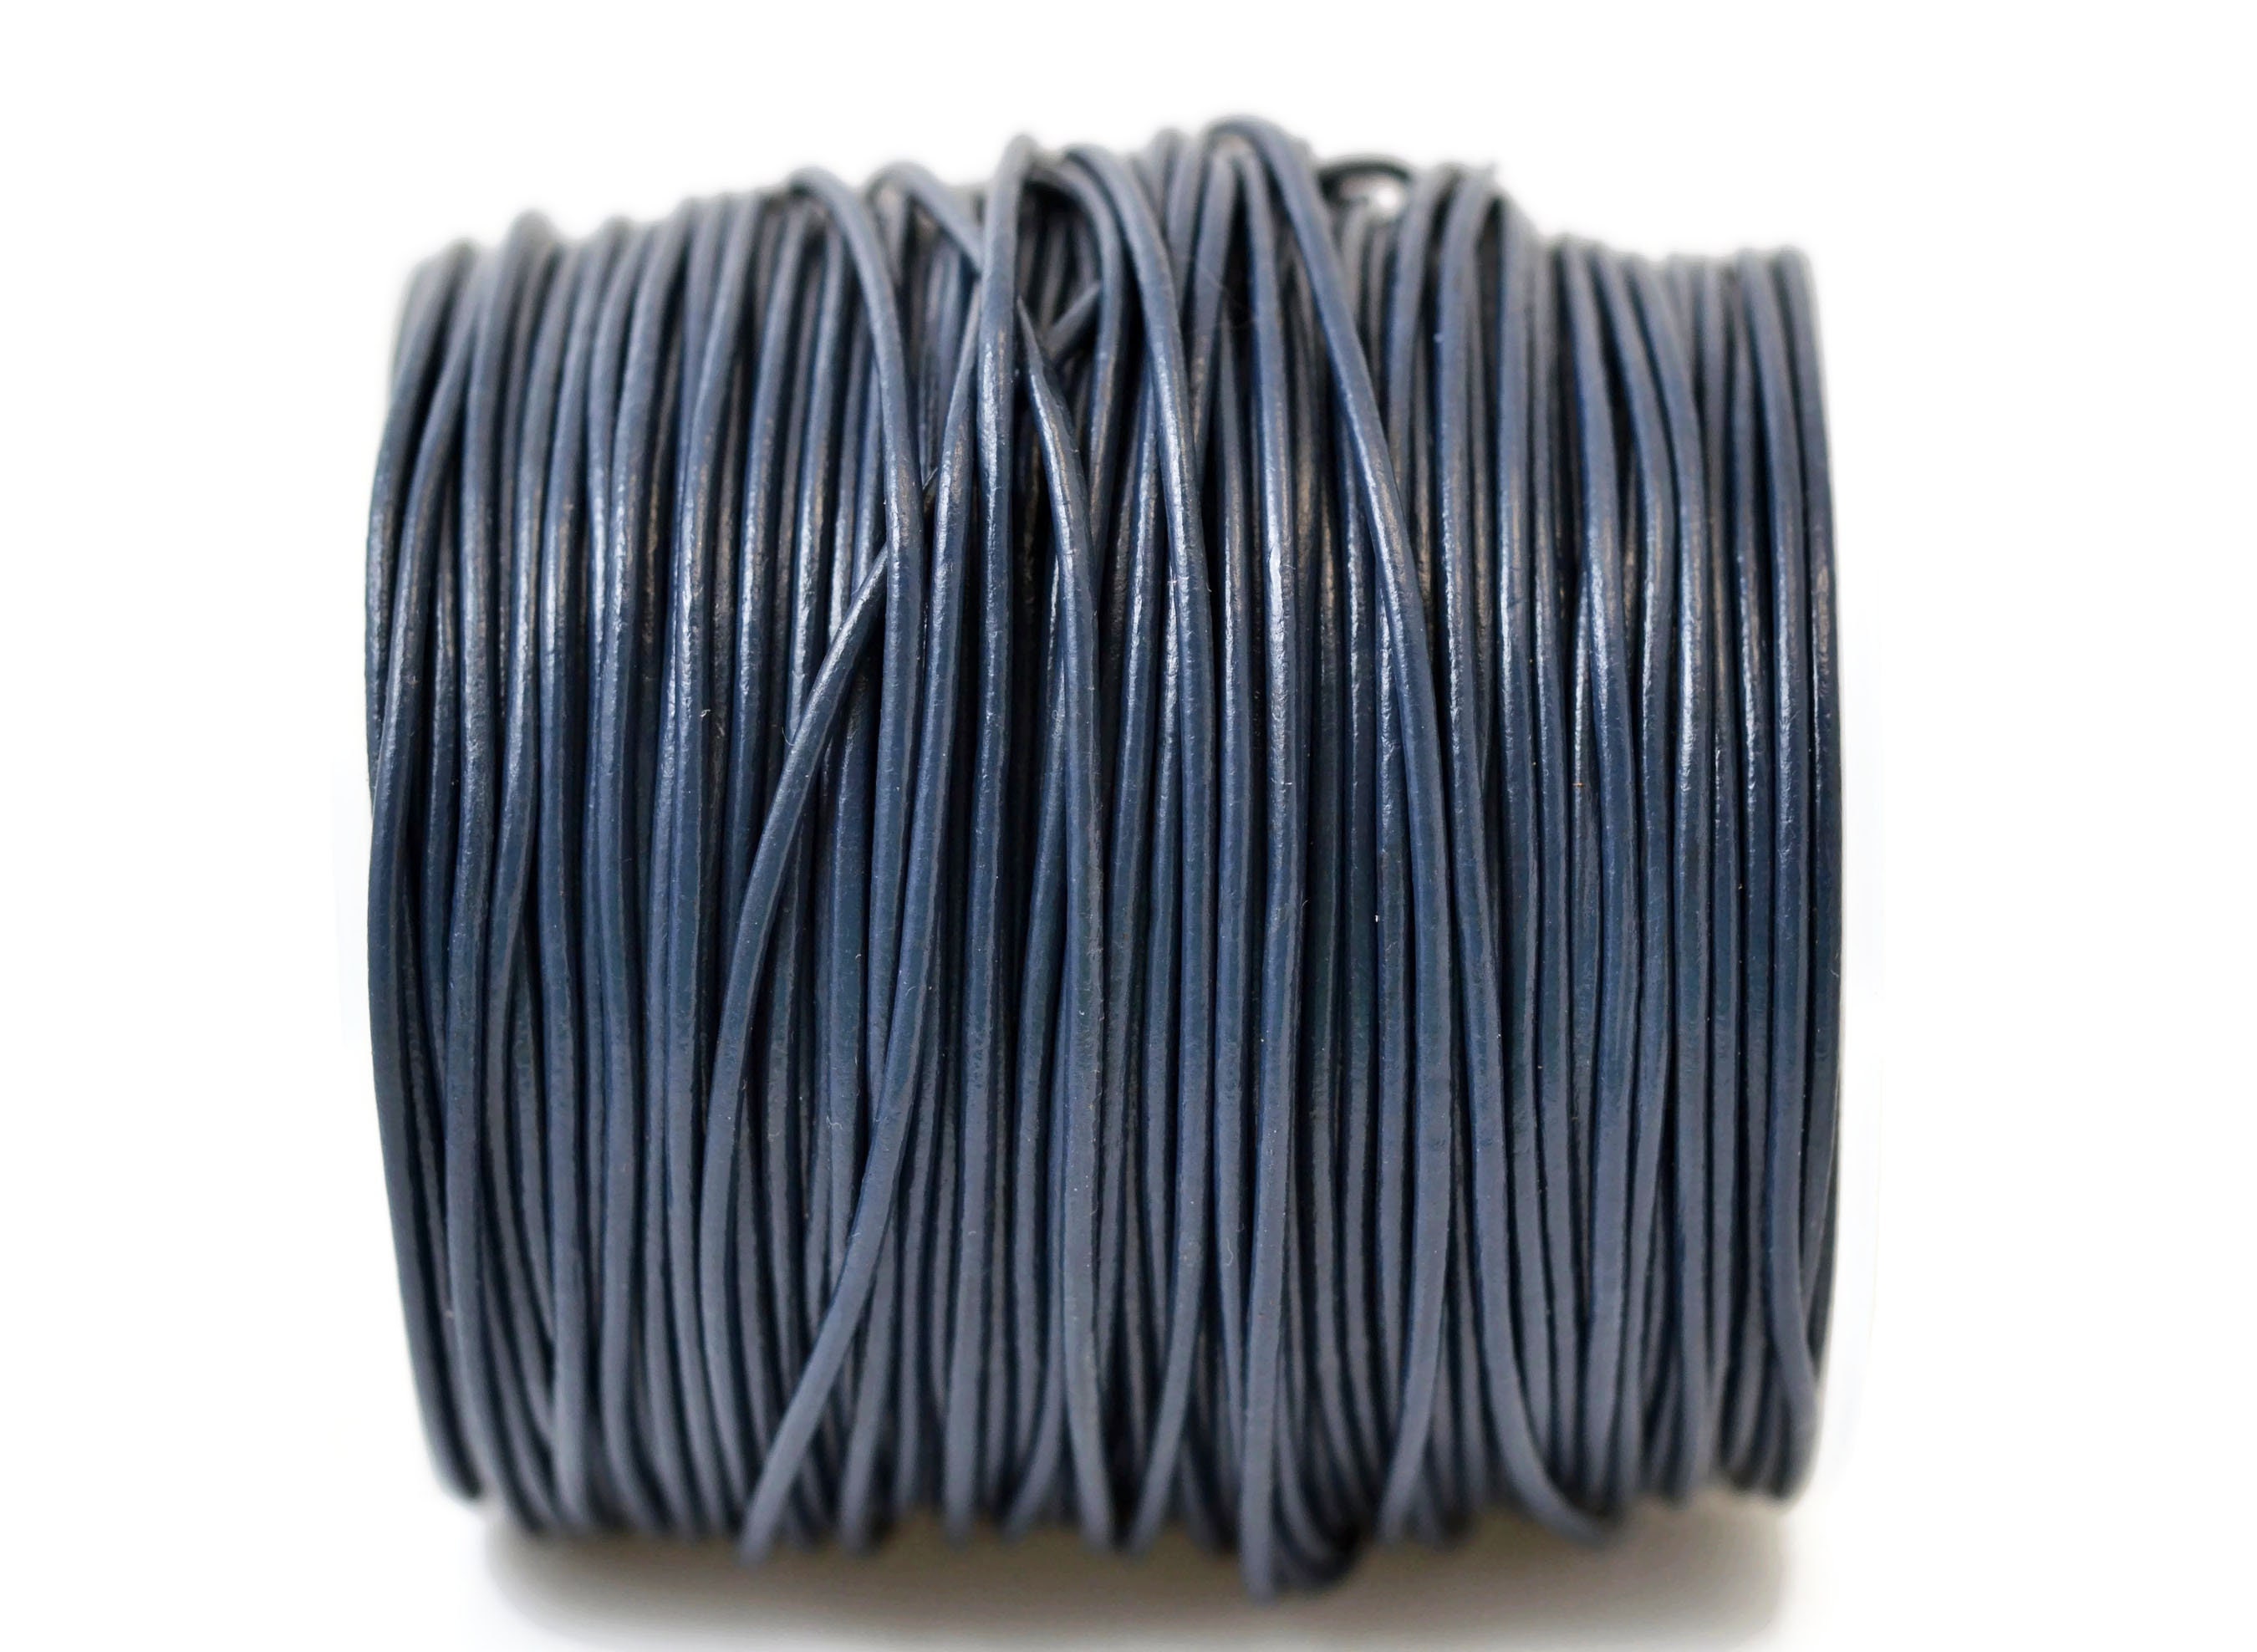 shapesbyX-10 Yards Royal Blue Leather Cord 1.5mm Leather String Genuin